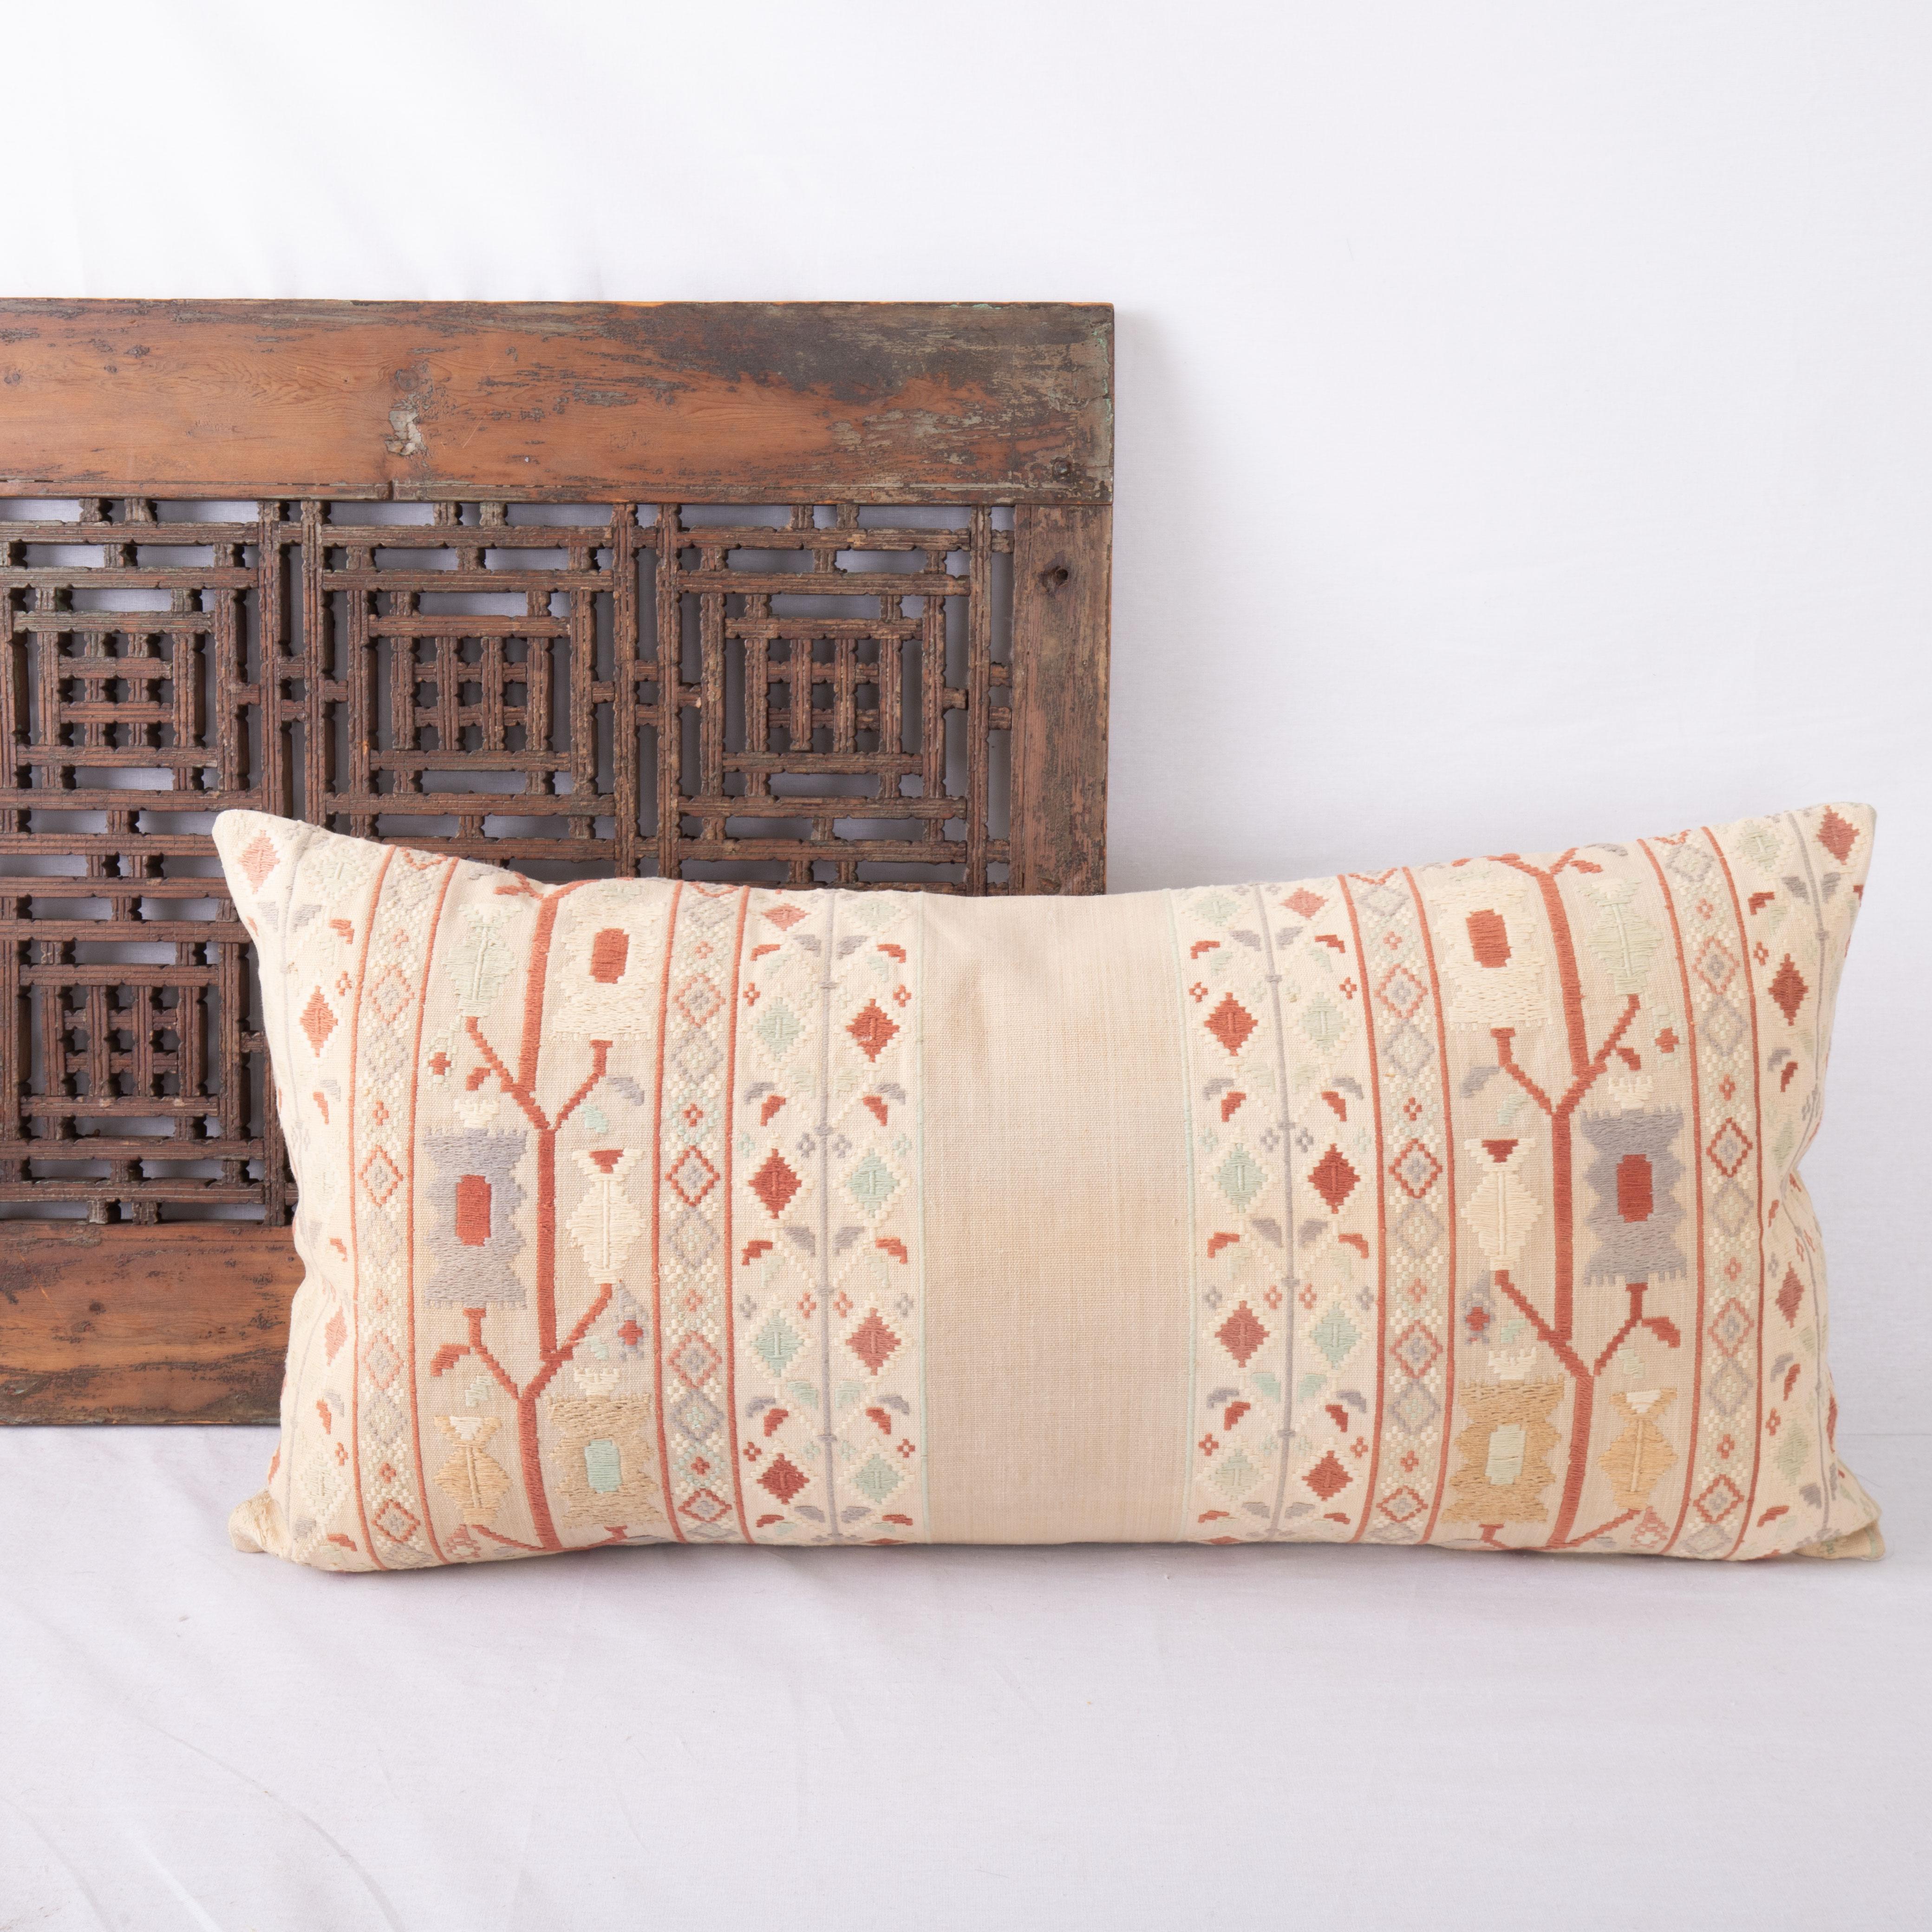 20th Century Pillow Cover Made From a Vintage East European Linen and Cotton Textile For Sale